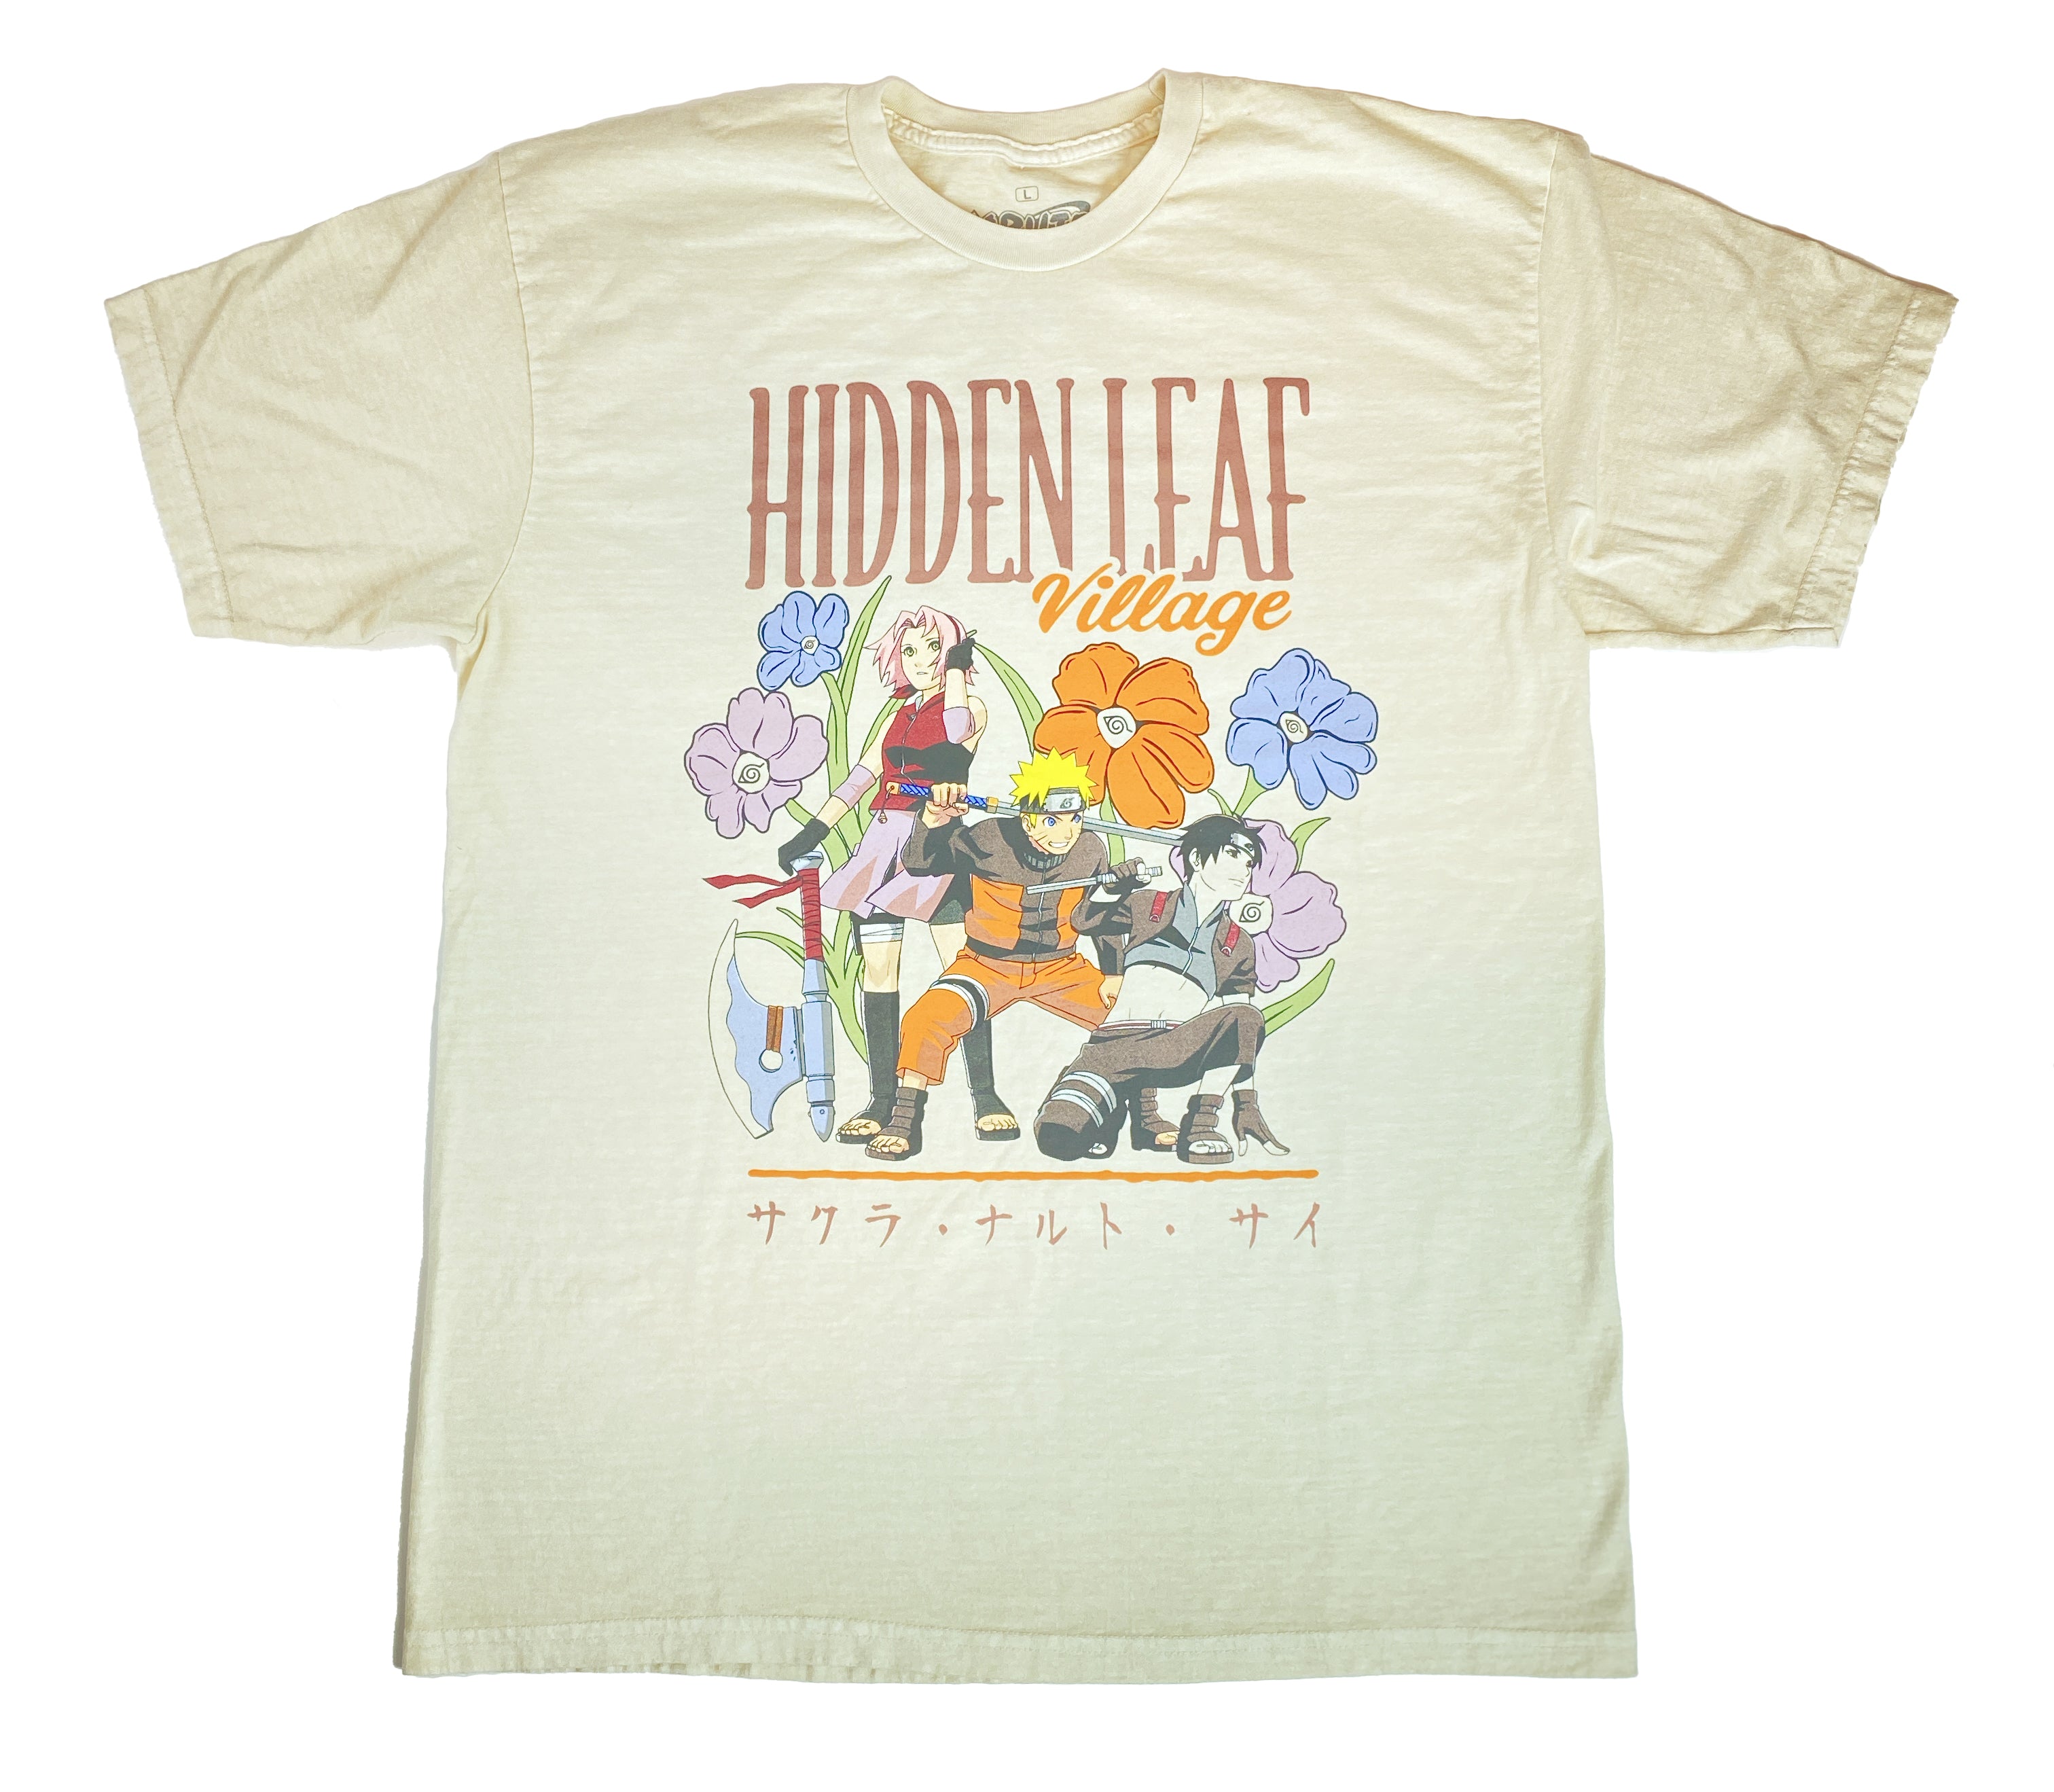 Naruto Shippuden - Village of the Hidden Leaf T-Shirt - Crunchyroll Exclusive! image count 0